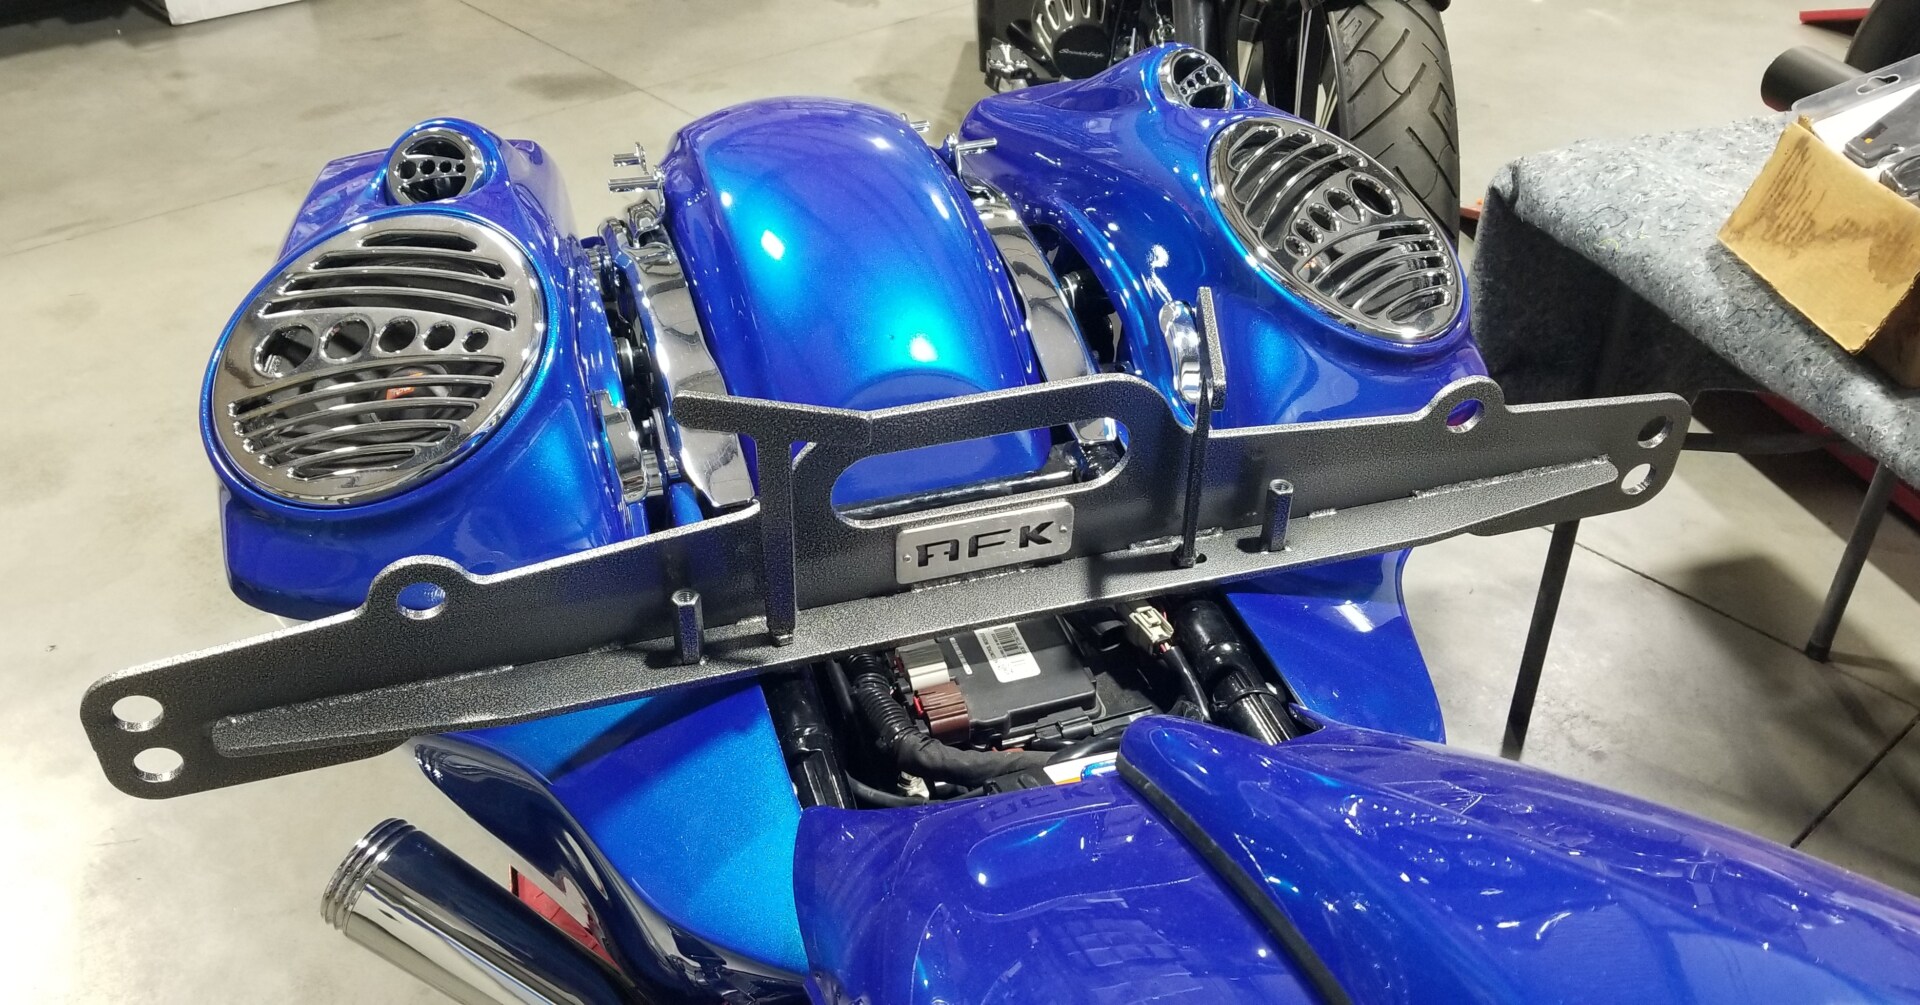 AFK Softail Electric Center Stand, 2018 & Up, FATBOY